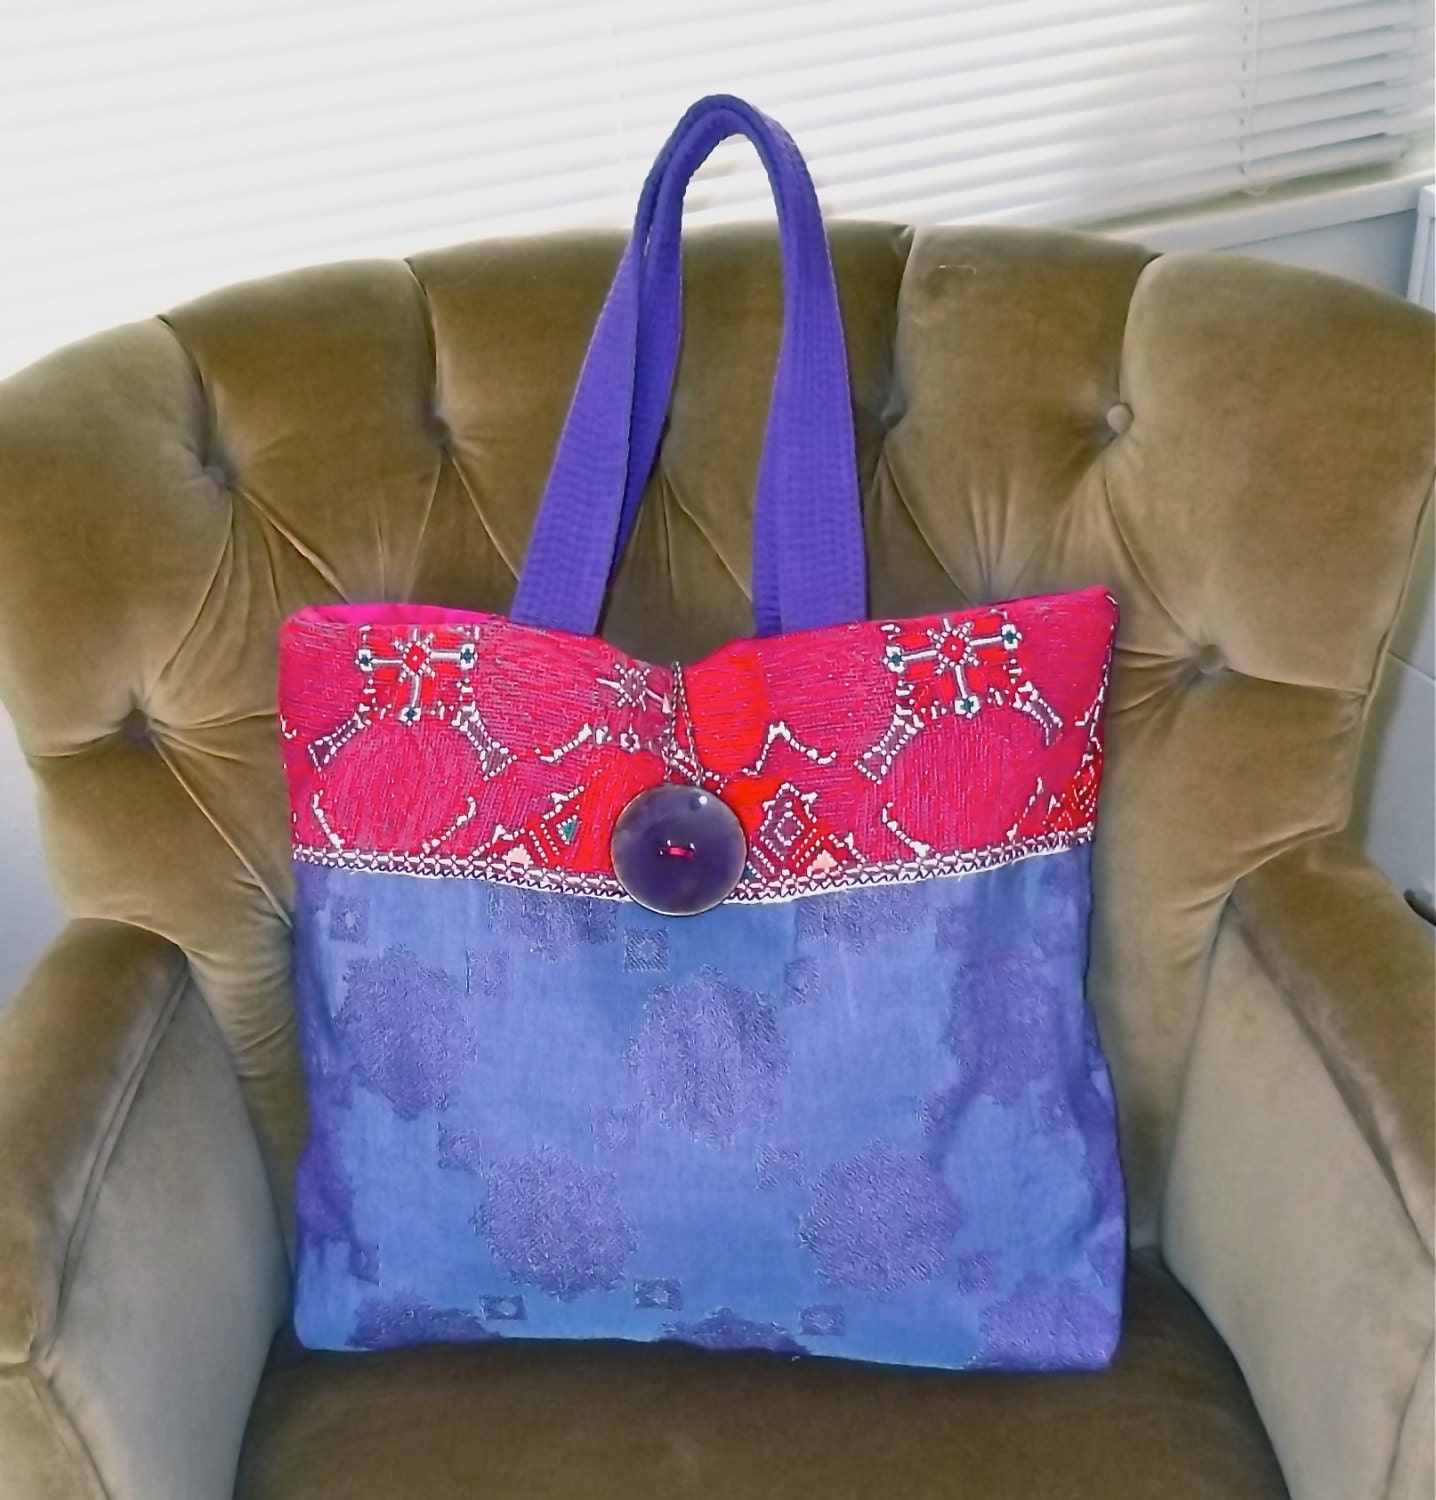 Beautiful purple and blue tote bag with Mexican embroidery